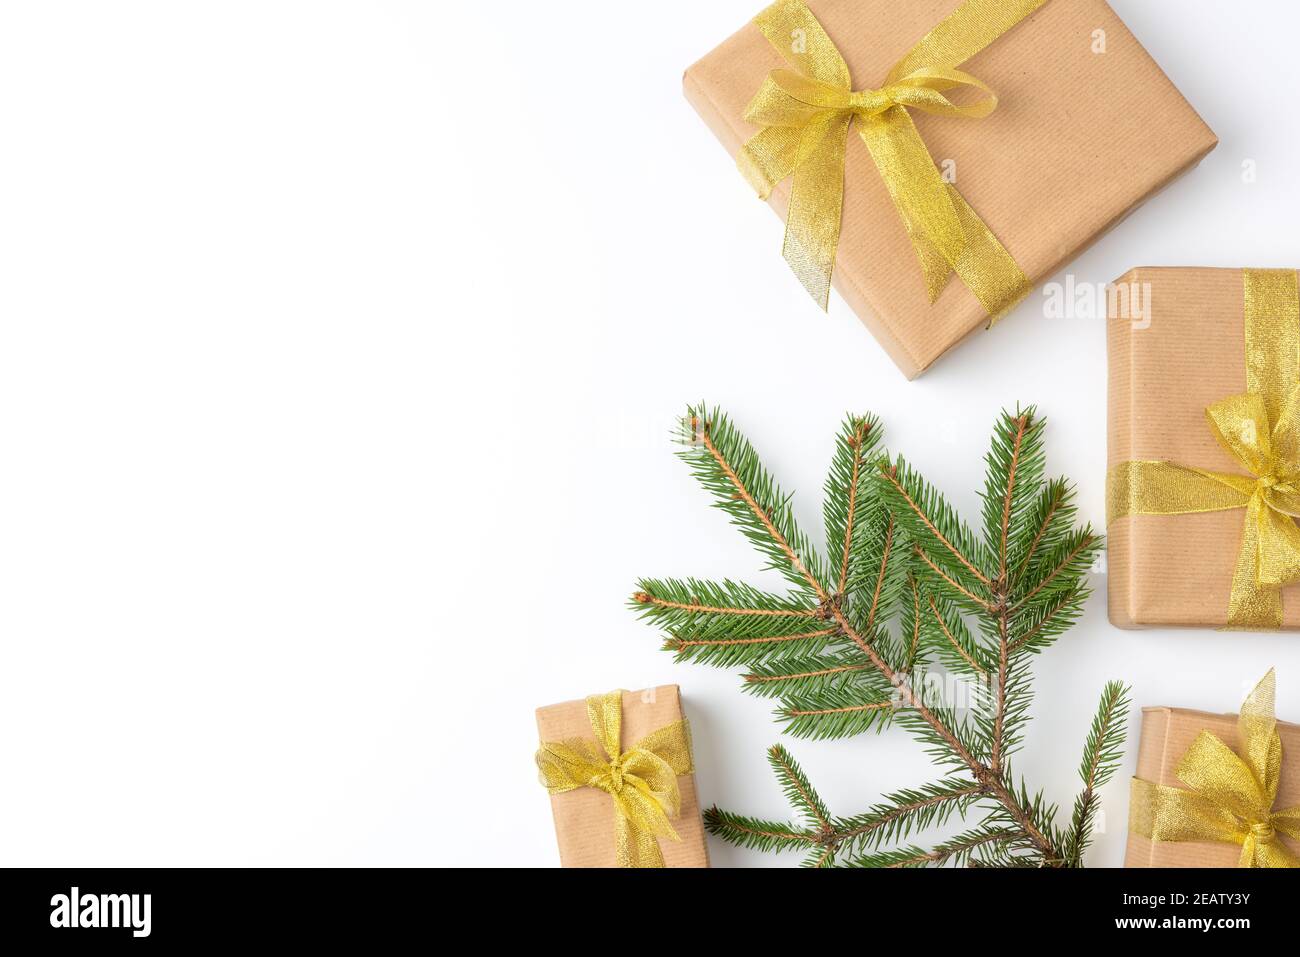 gift boxes wrapped in brown paper and tied with a golden ribbon on a white background Stock Photo